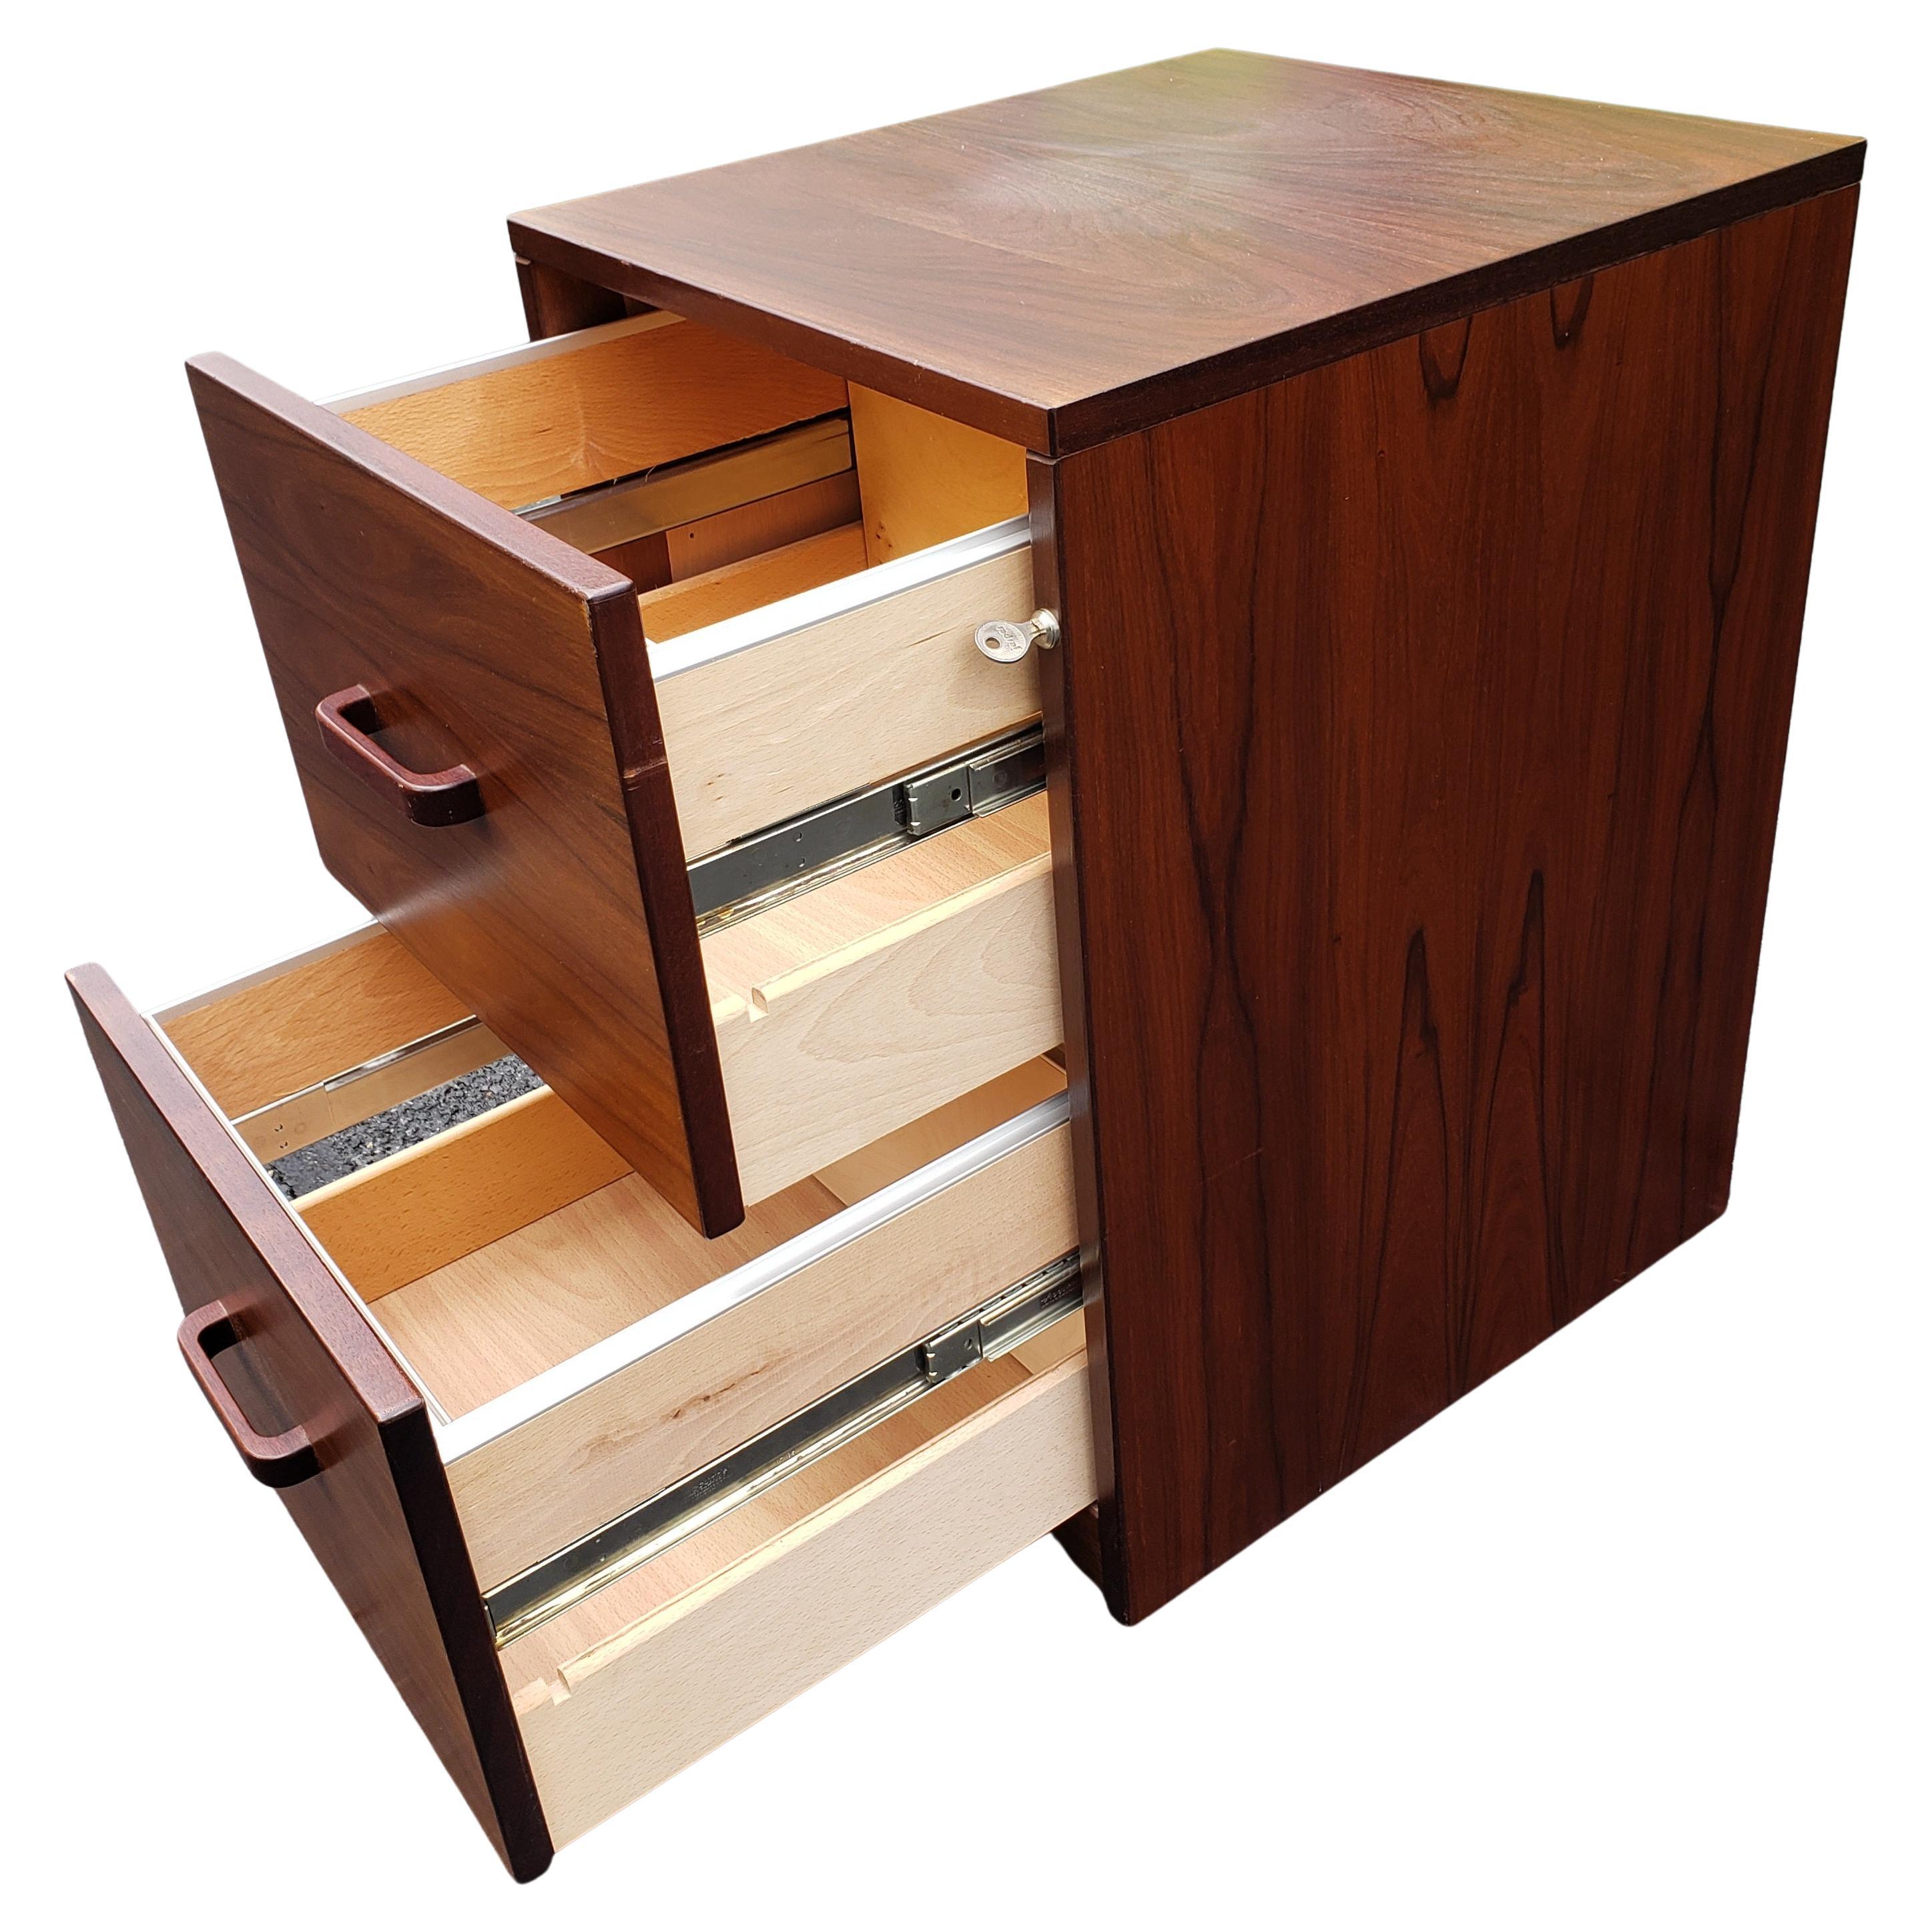 Stained Mid-20th Century Danish Modern 2-Drawer Teak Rolling Filing Cabinet with Key